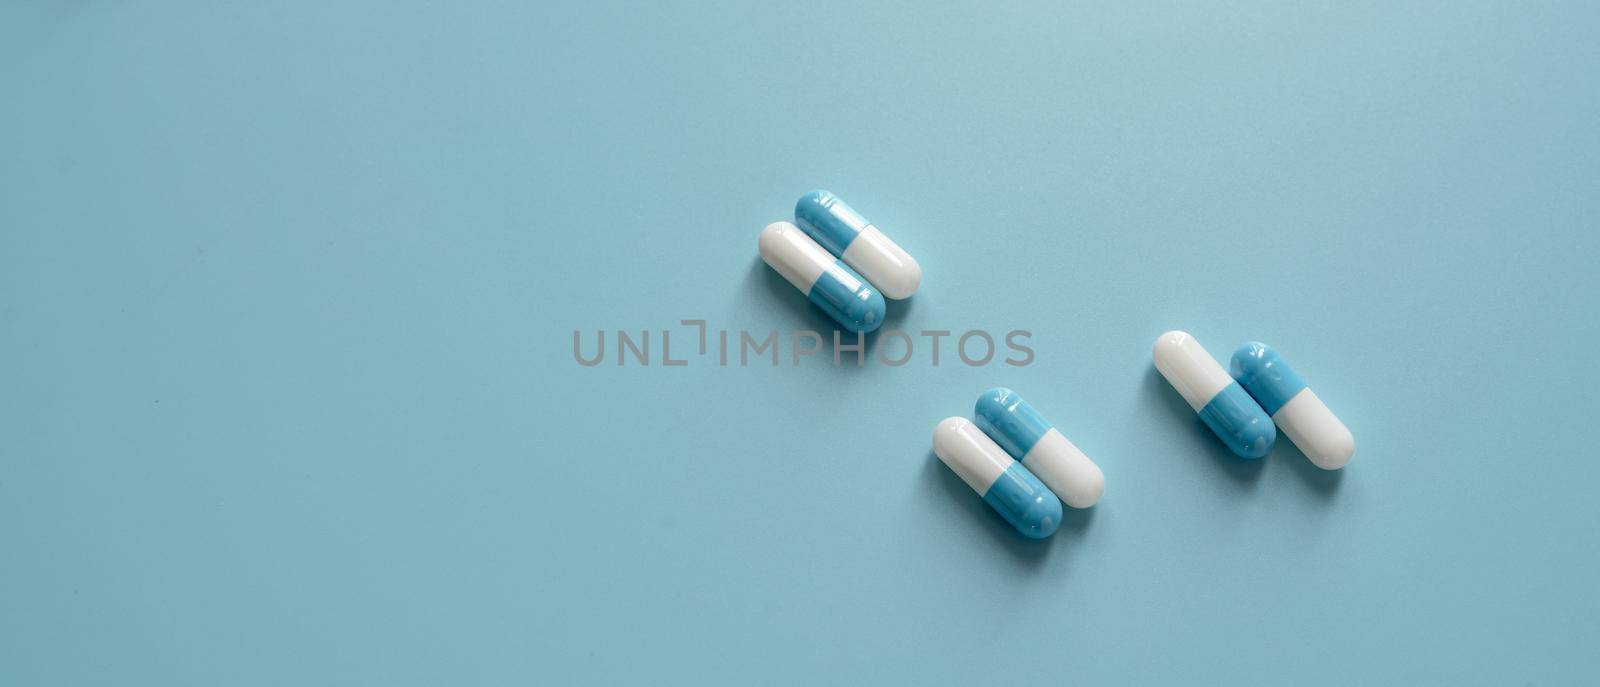 Blue and white capsule pills on blue background. Prescription drugs. Pharmaceutics background. Pharmaceutical industry. Dose of medicine for treating illness. Healthcare and medicine. Medical care. by Fahroni